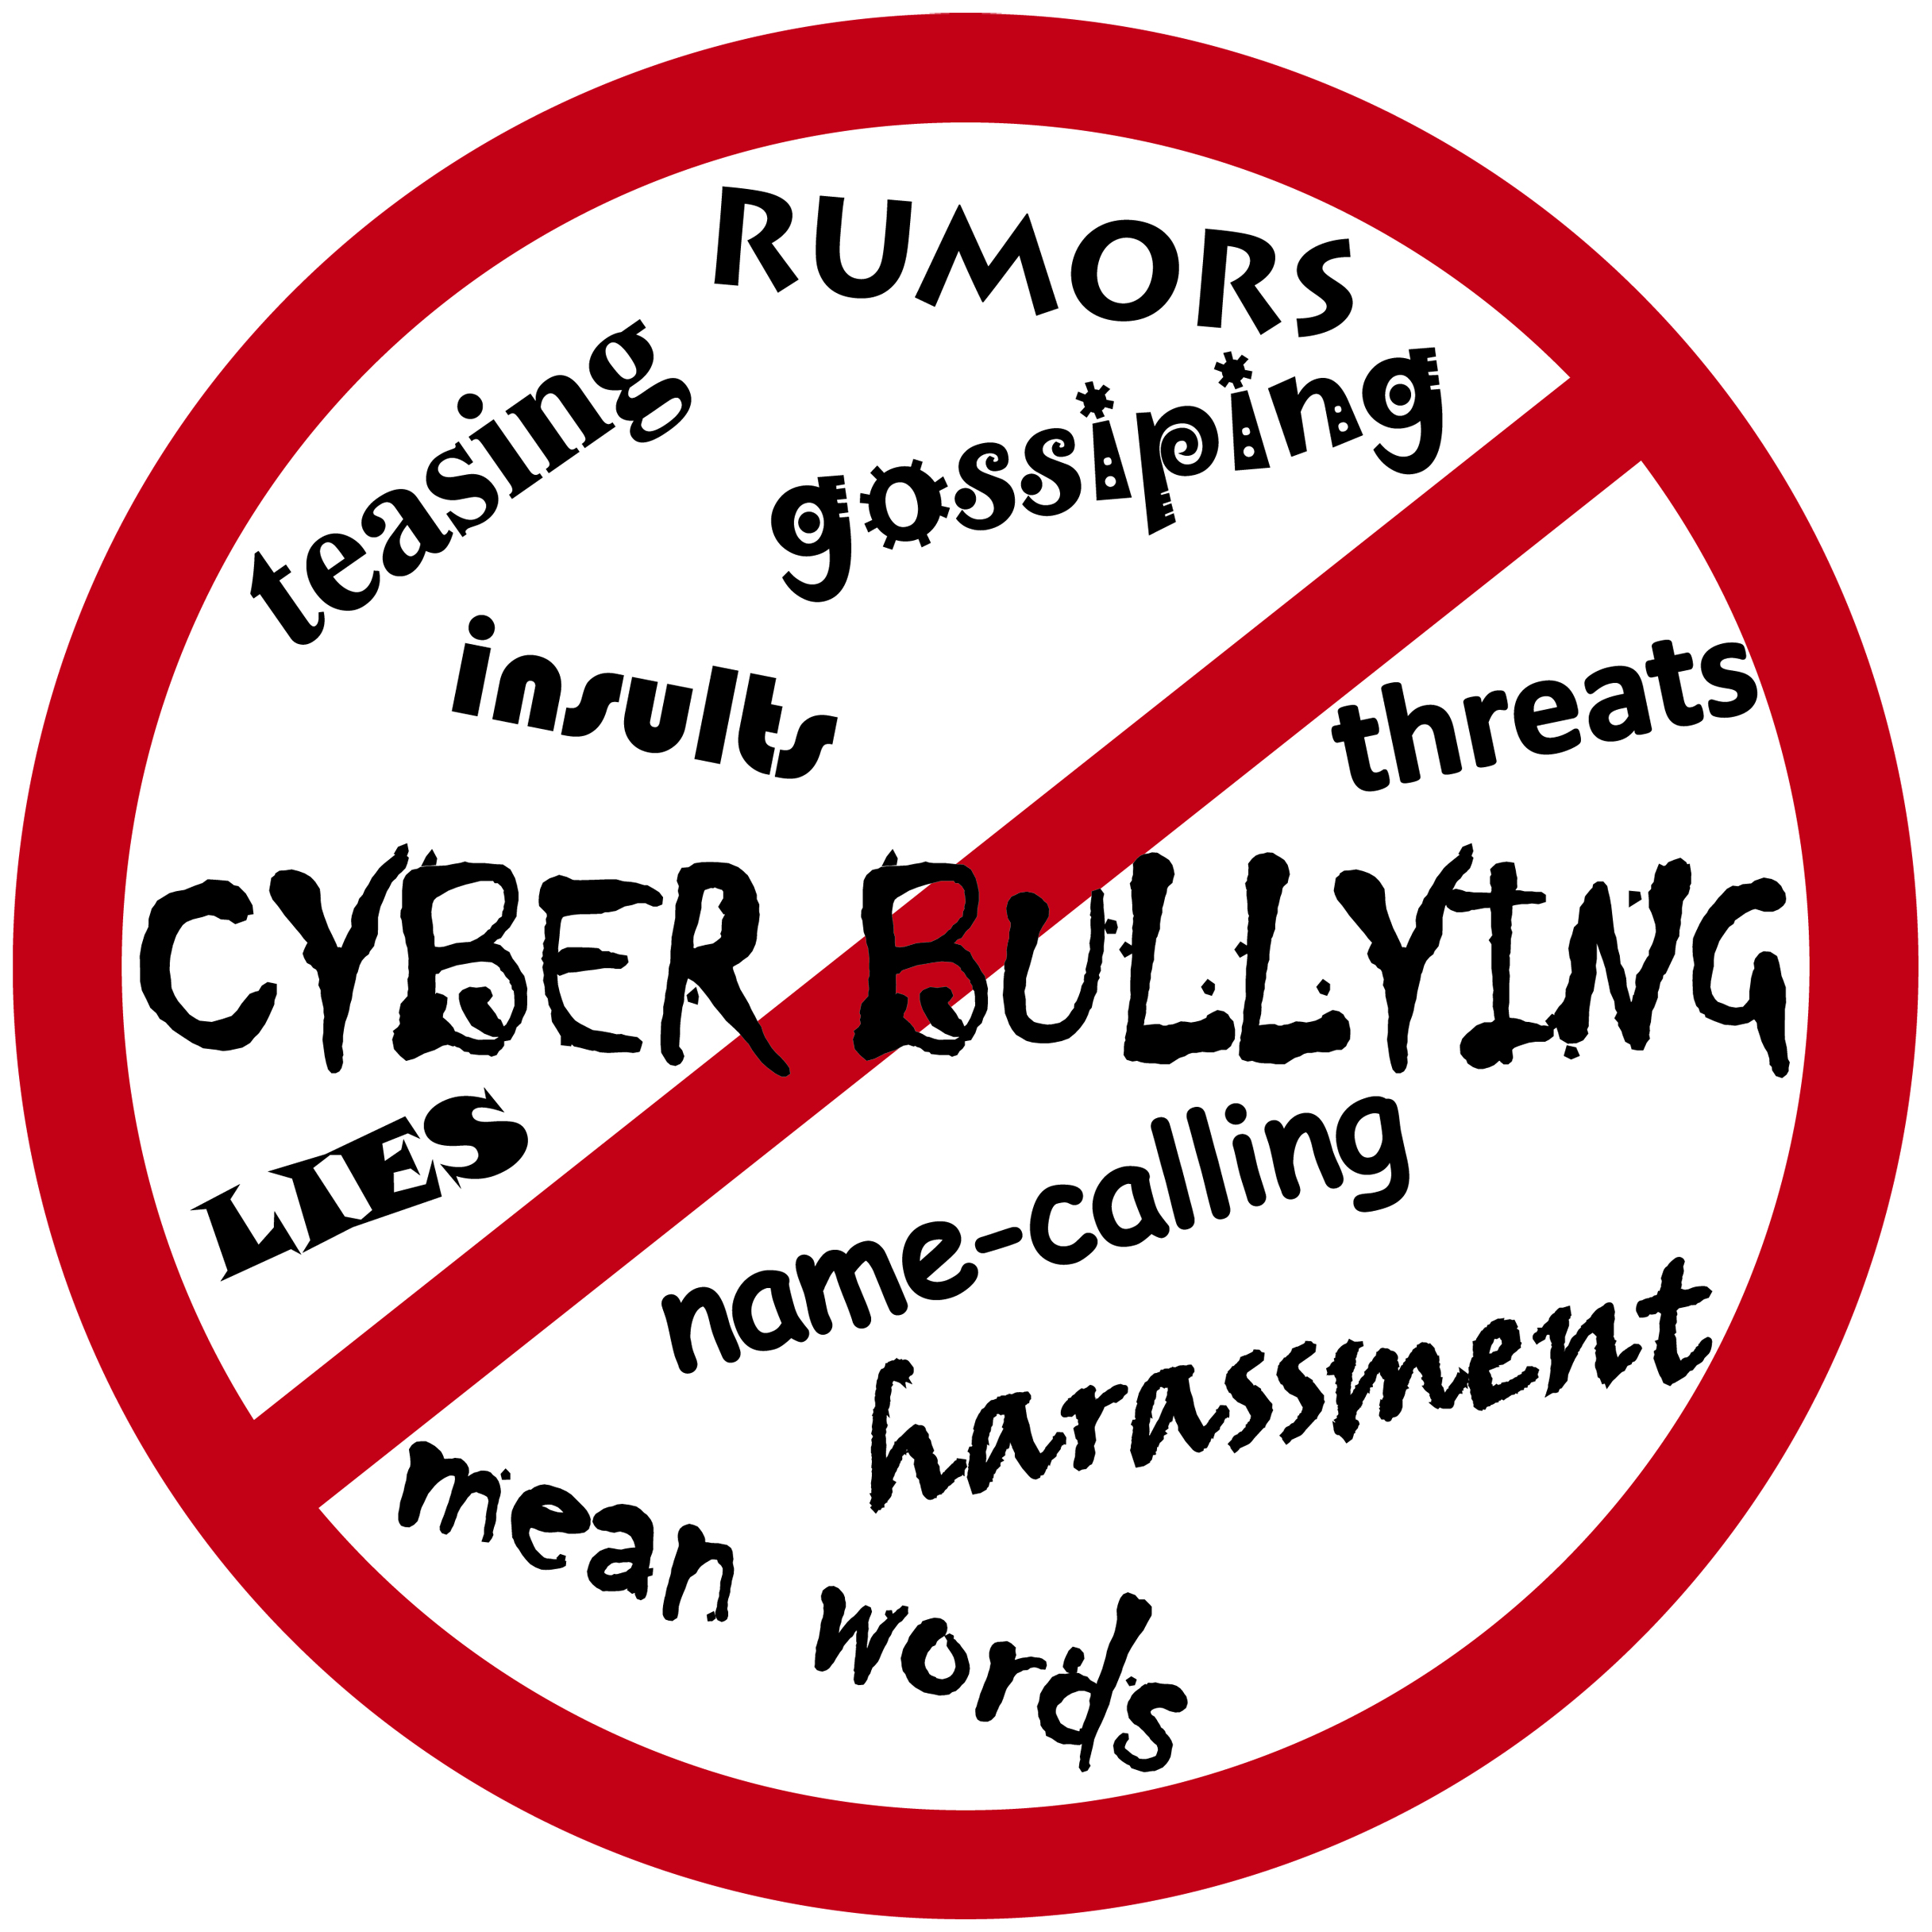 about cyberbullying